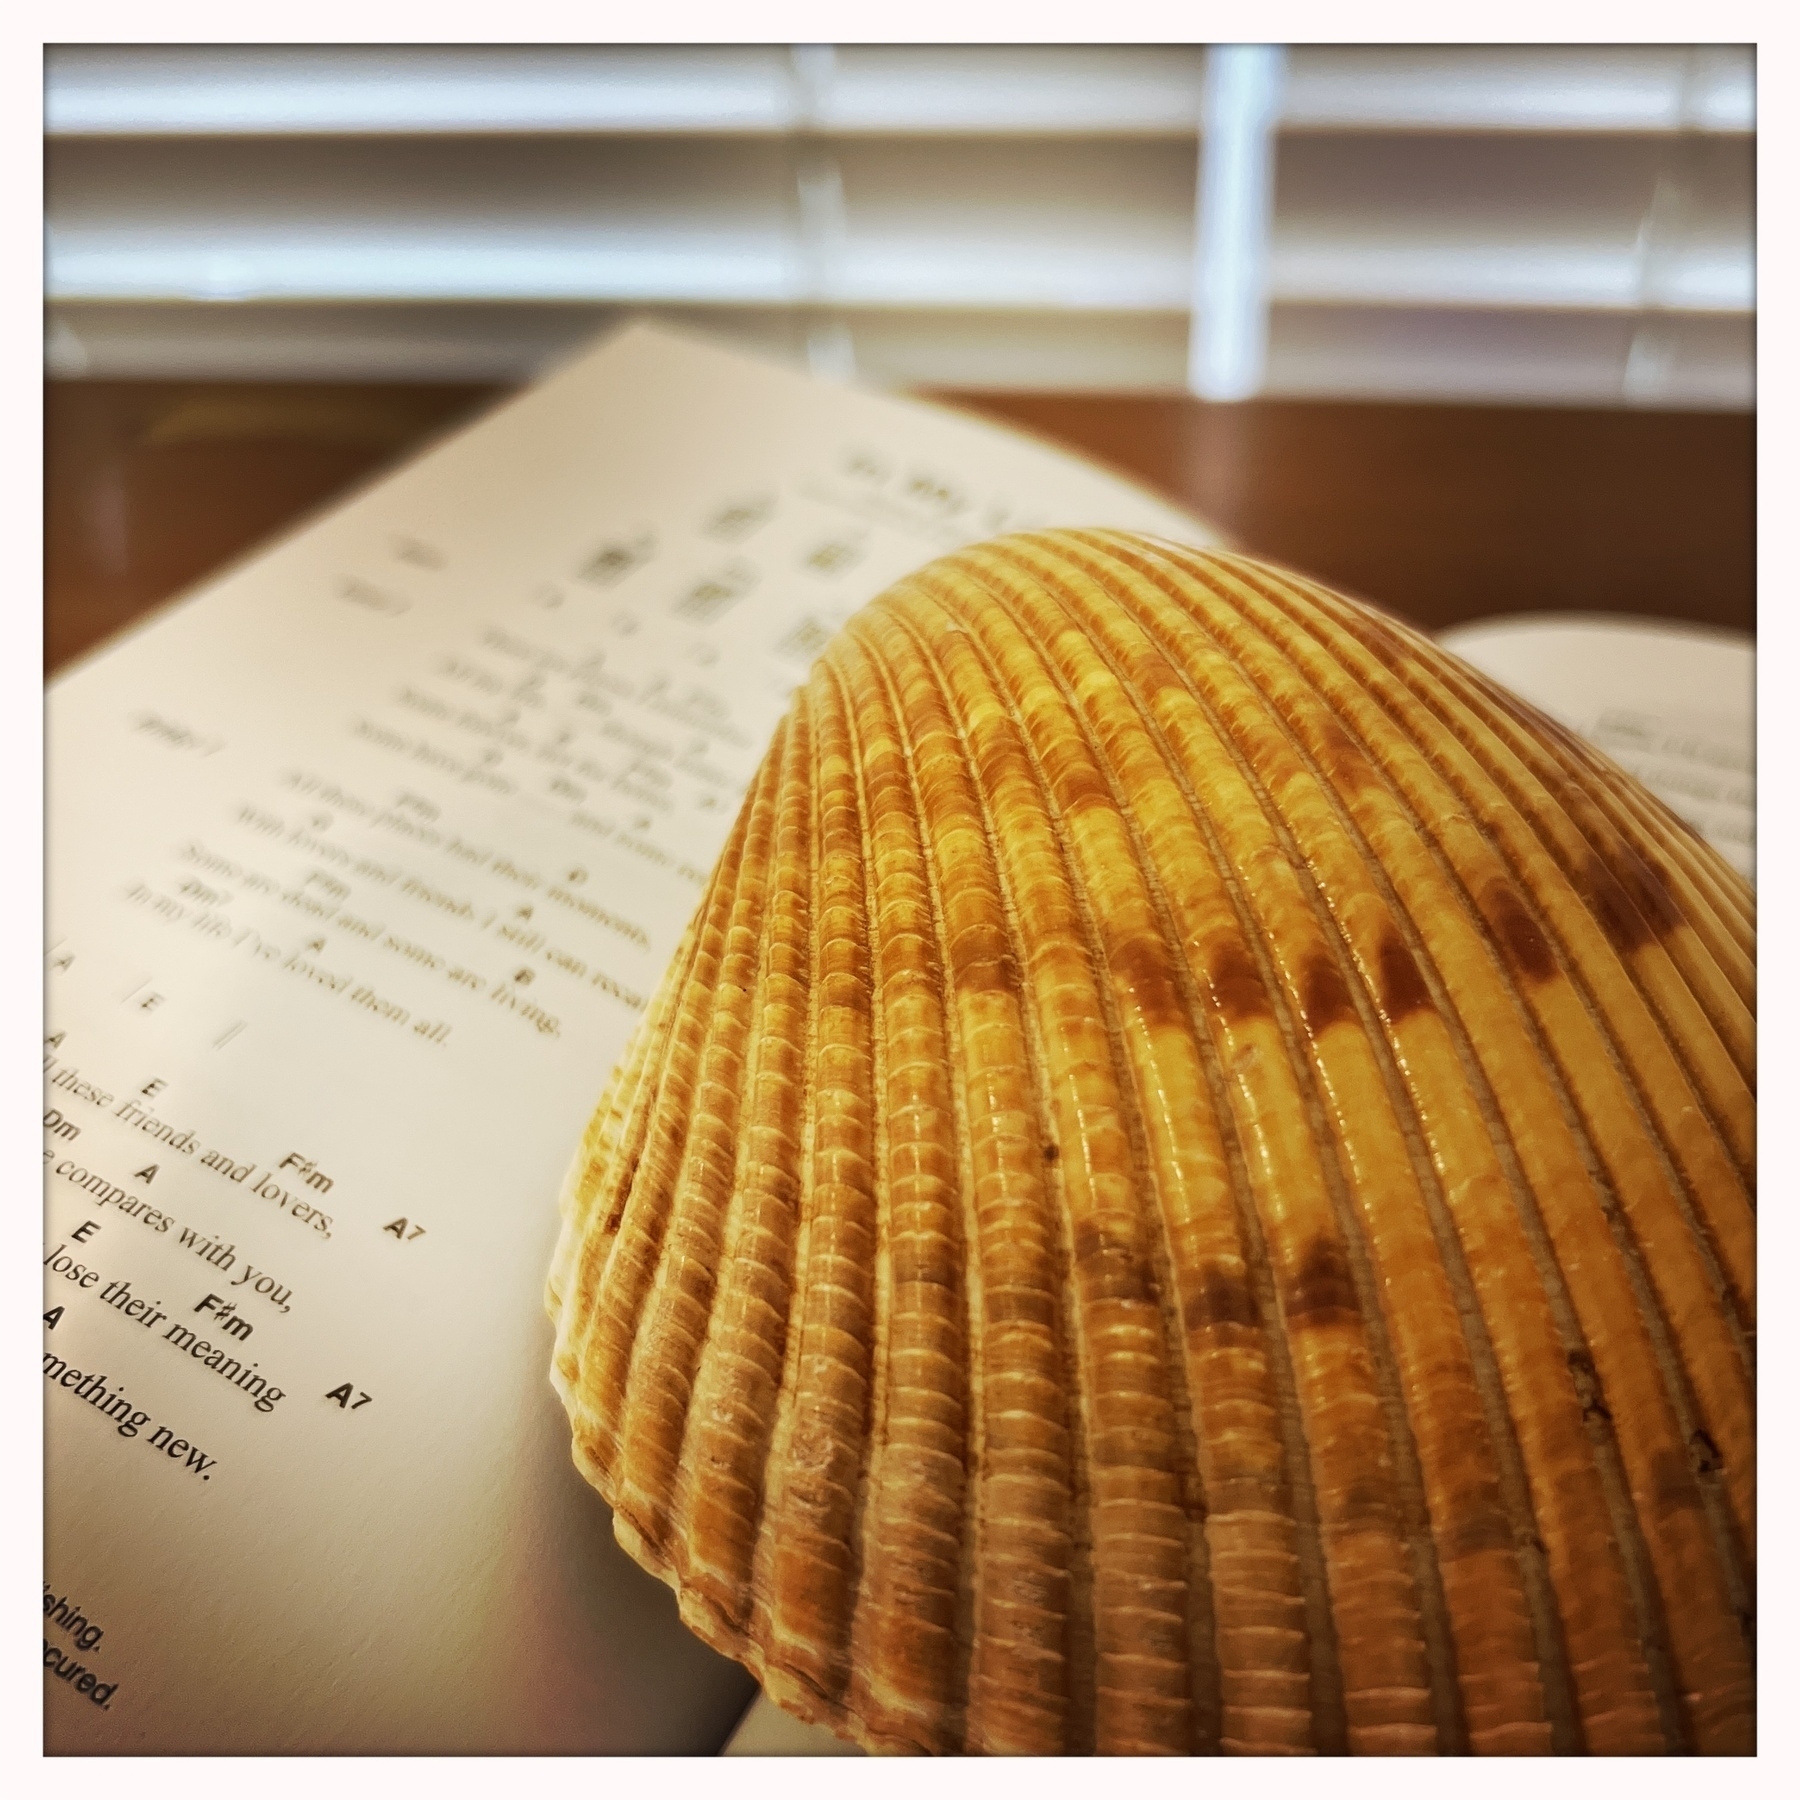 Shell and a song book